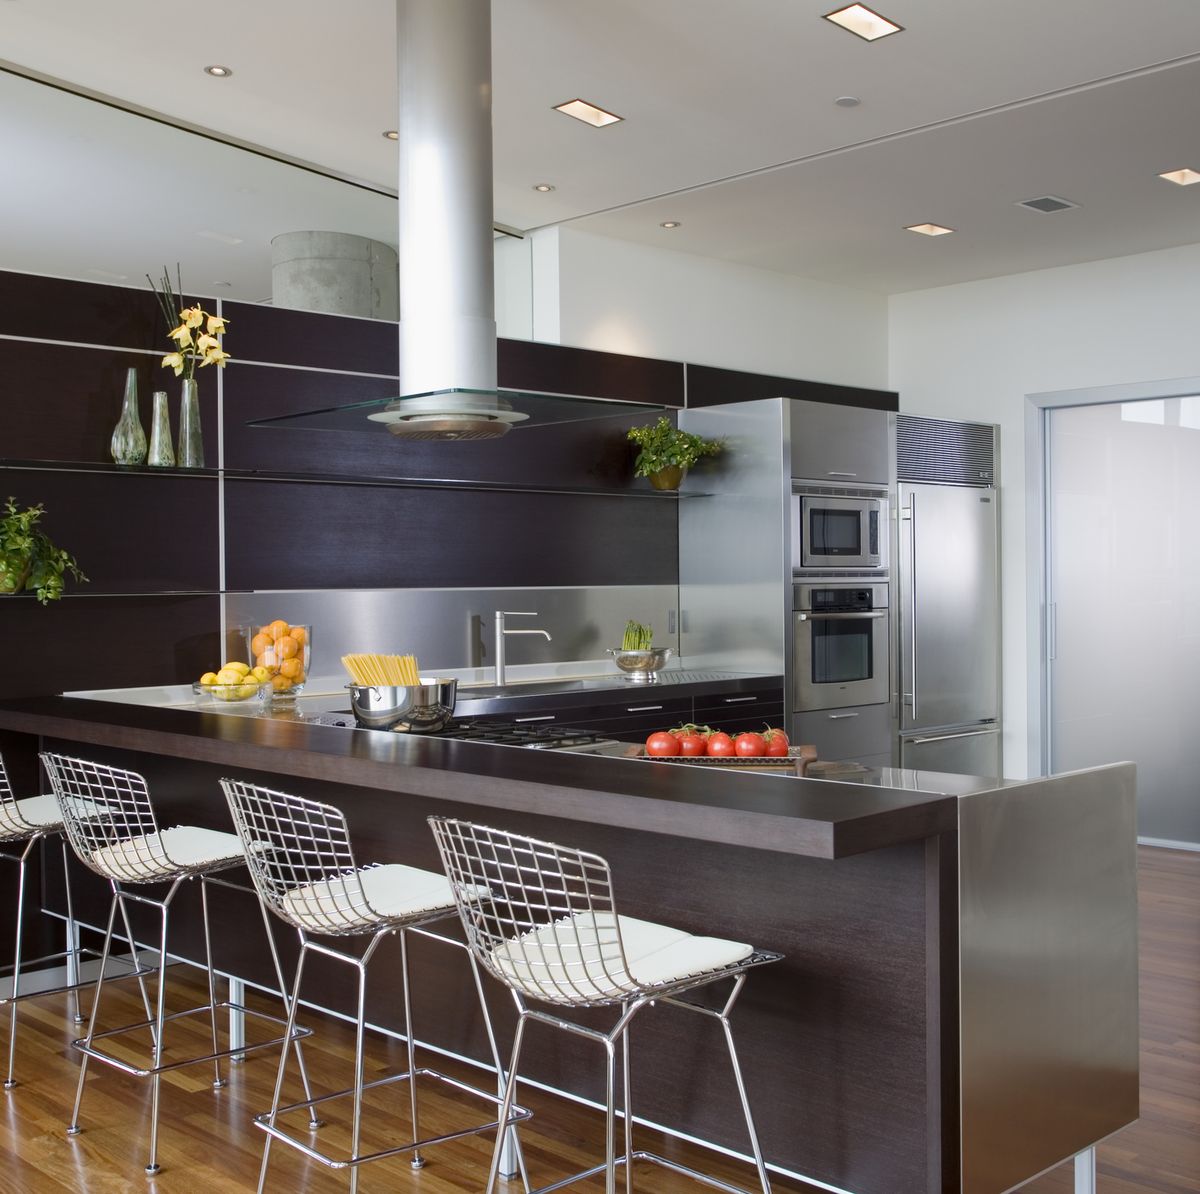 7 Most Common Kitchen Design and Layout Mistakes to Avoid